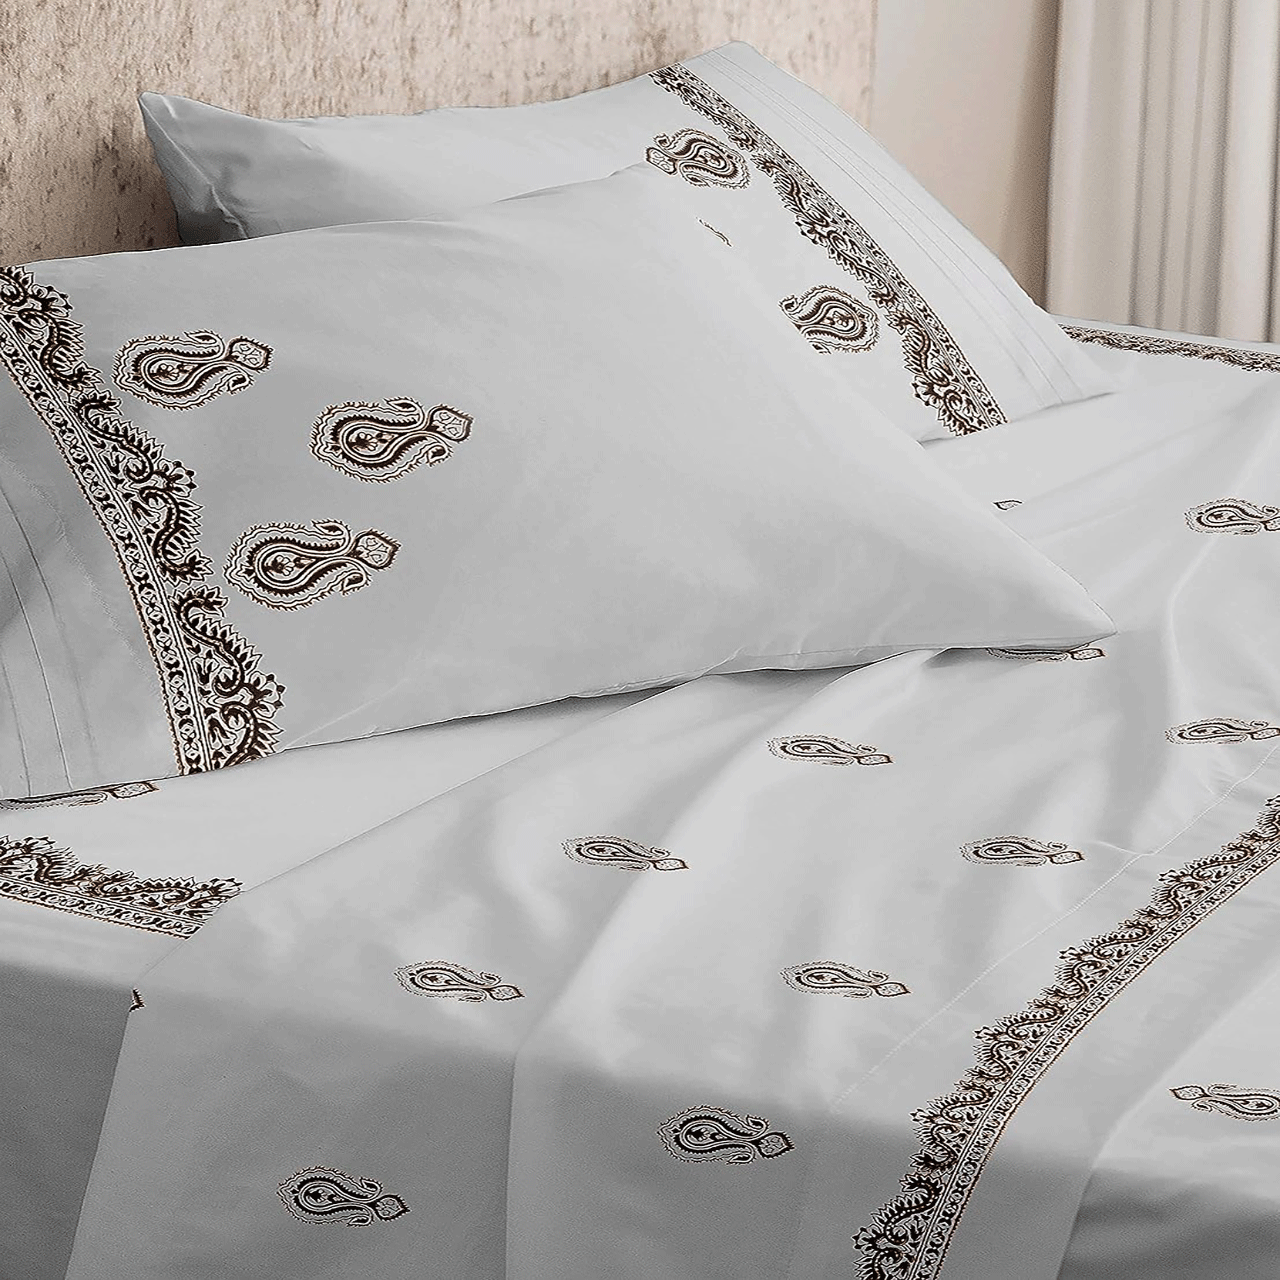 EUQIFAH,Handmade with Woodenblock, Cotton Percale Bed Sheet Set - 4 Pieces - Cool, Breathable, Durable - Fade & Shrink Resistant, Hypoallergenic - Luxurious Comfort Bedding(King Size)